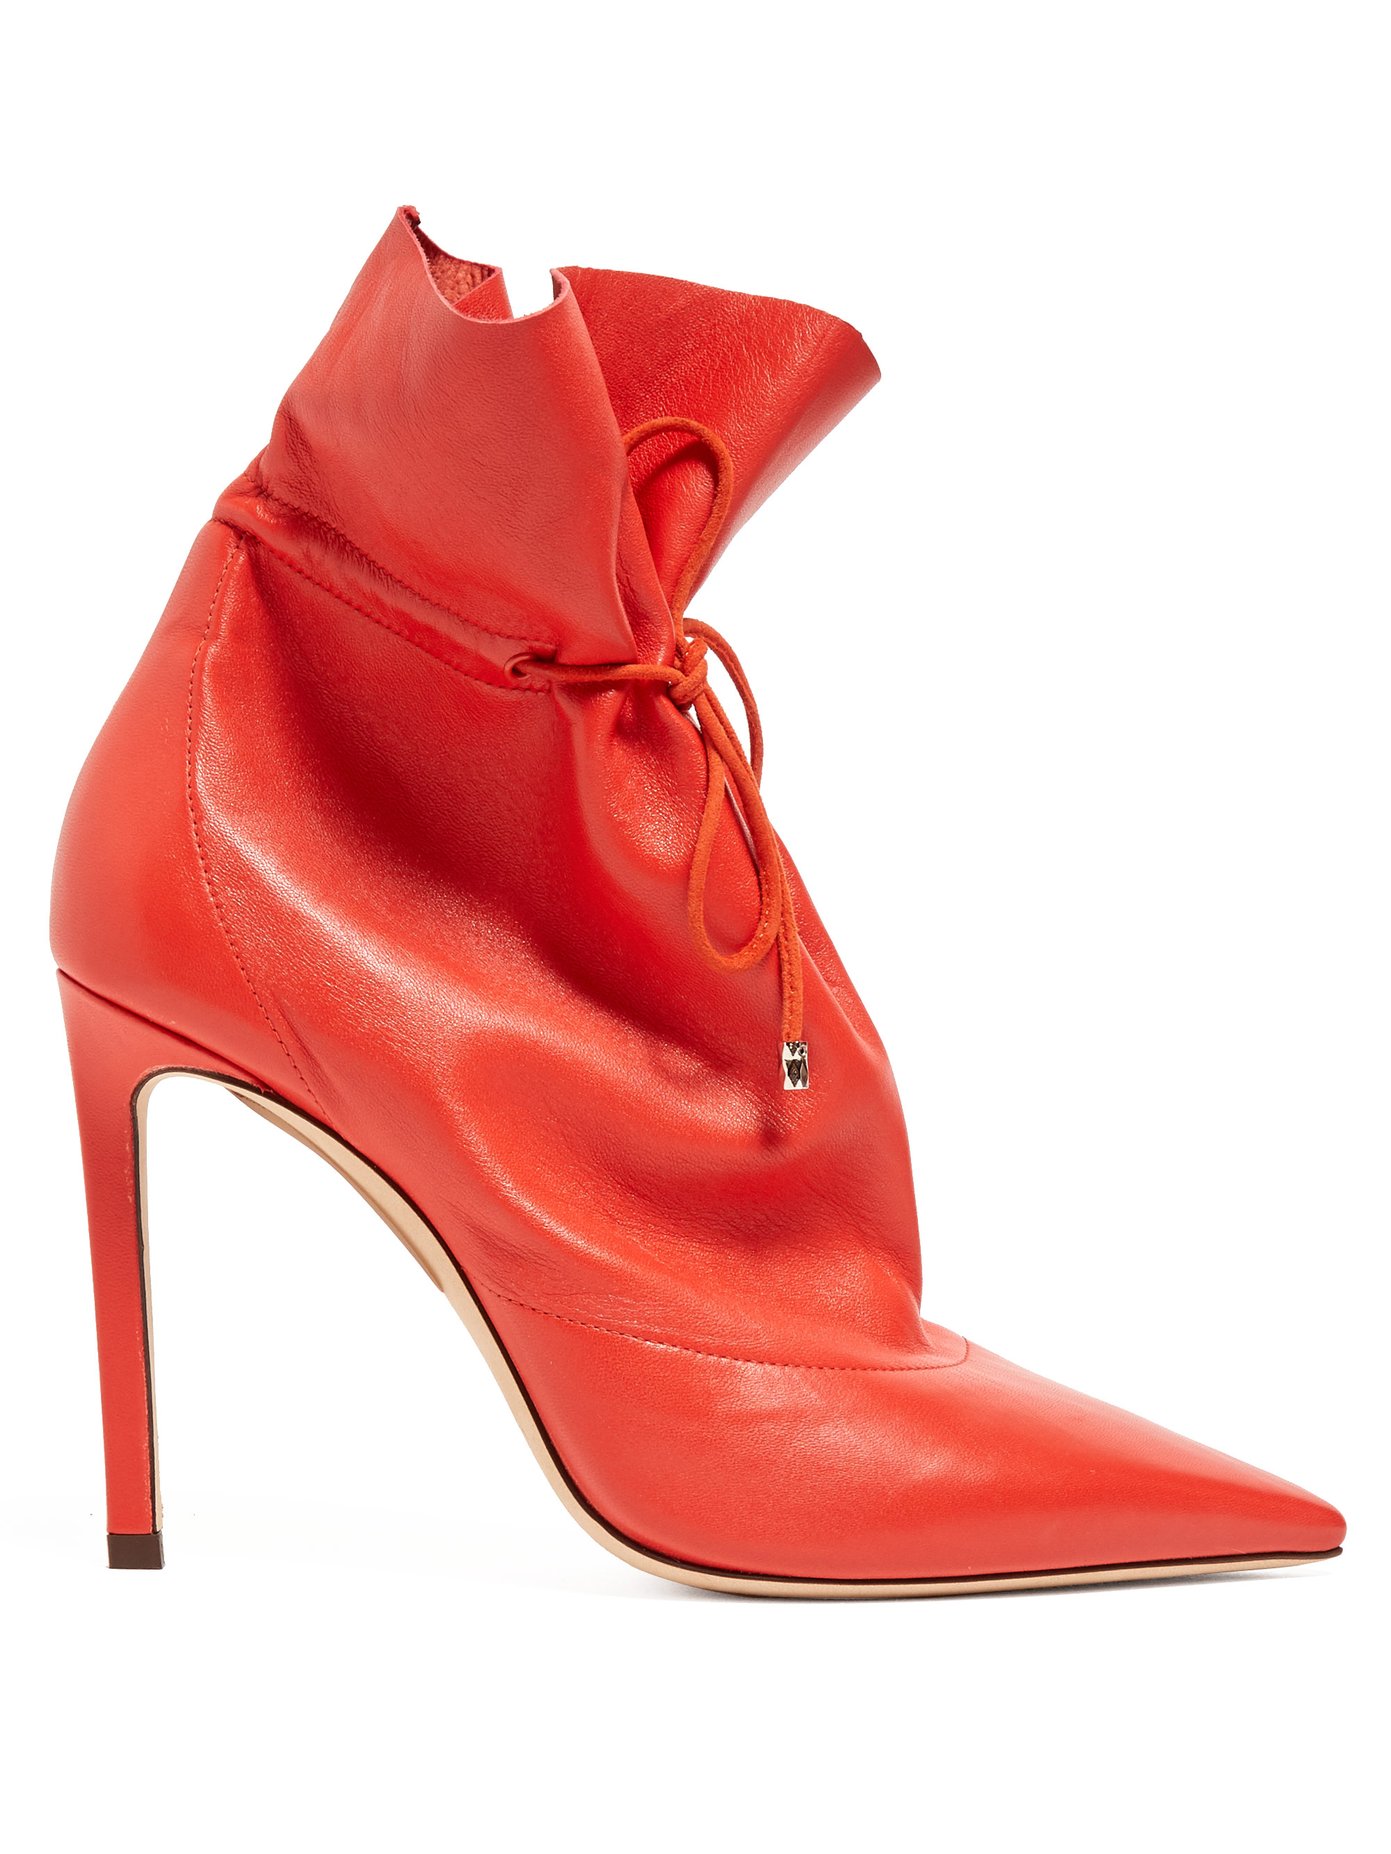 jimmy choo red boots